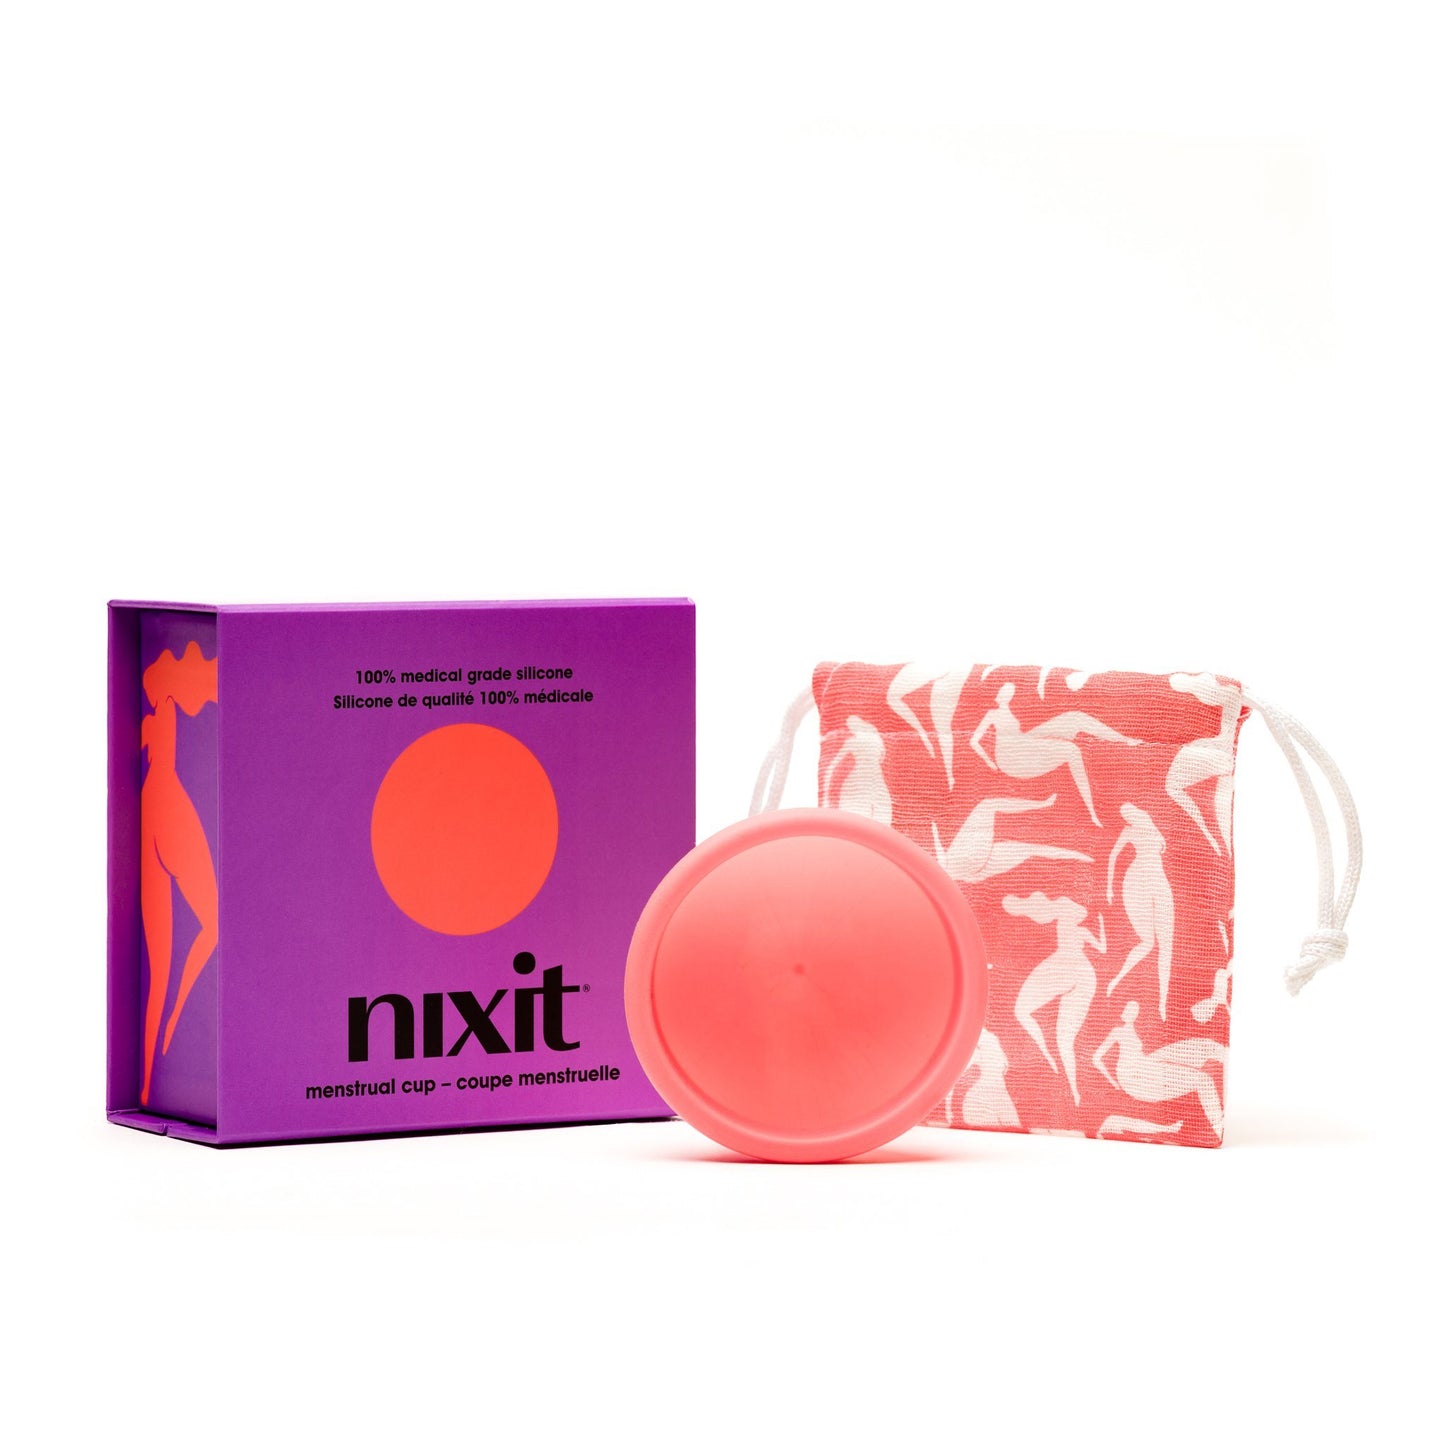 Photo of purple nixit menstrual cup/period cup product box, and product reusable bag.